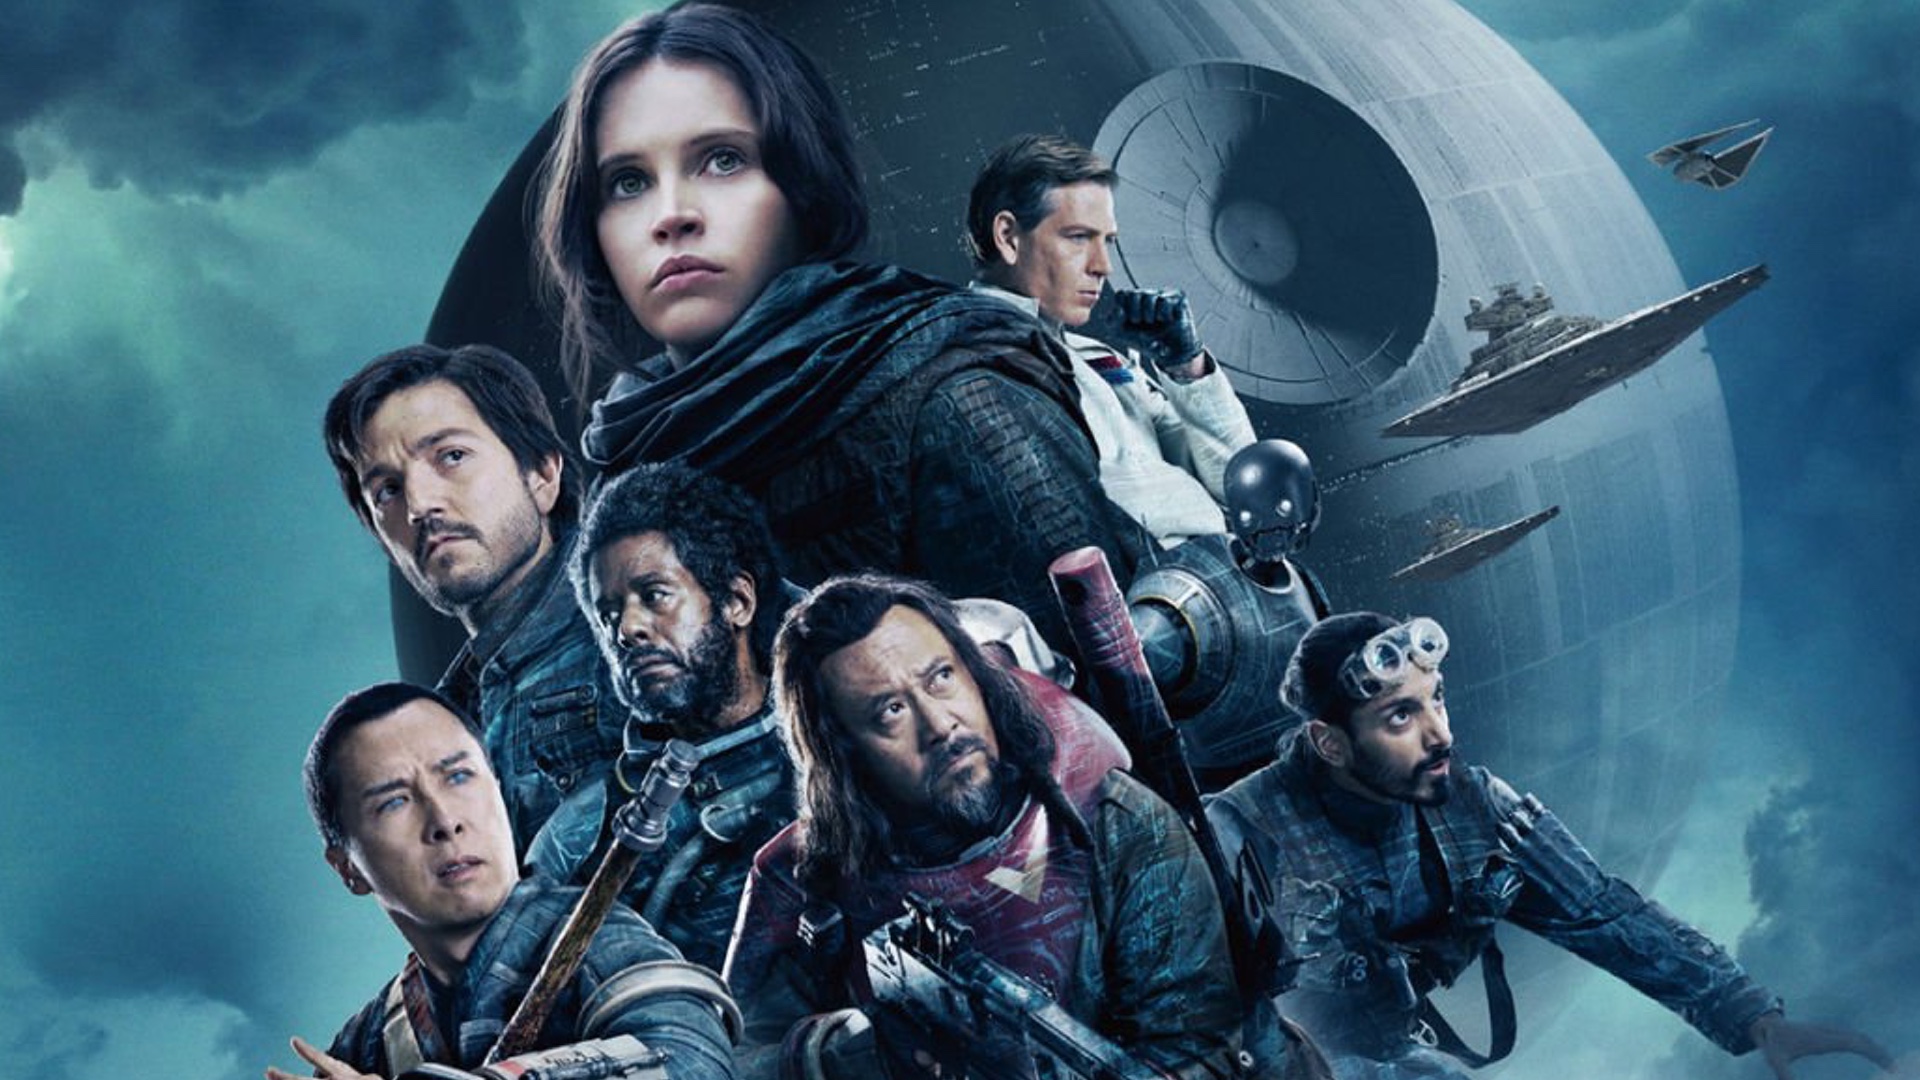 Review: ROGUE ONE: A STAR WARS STORY Is the Best STAR WARS Film